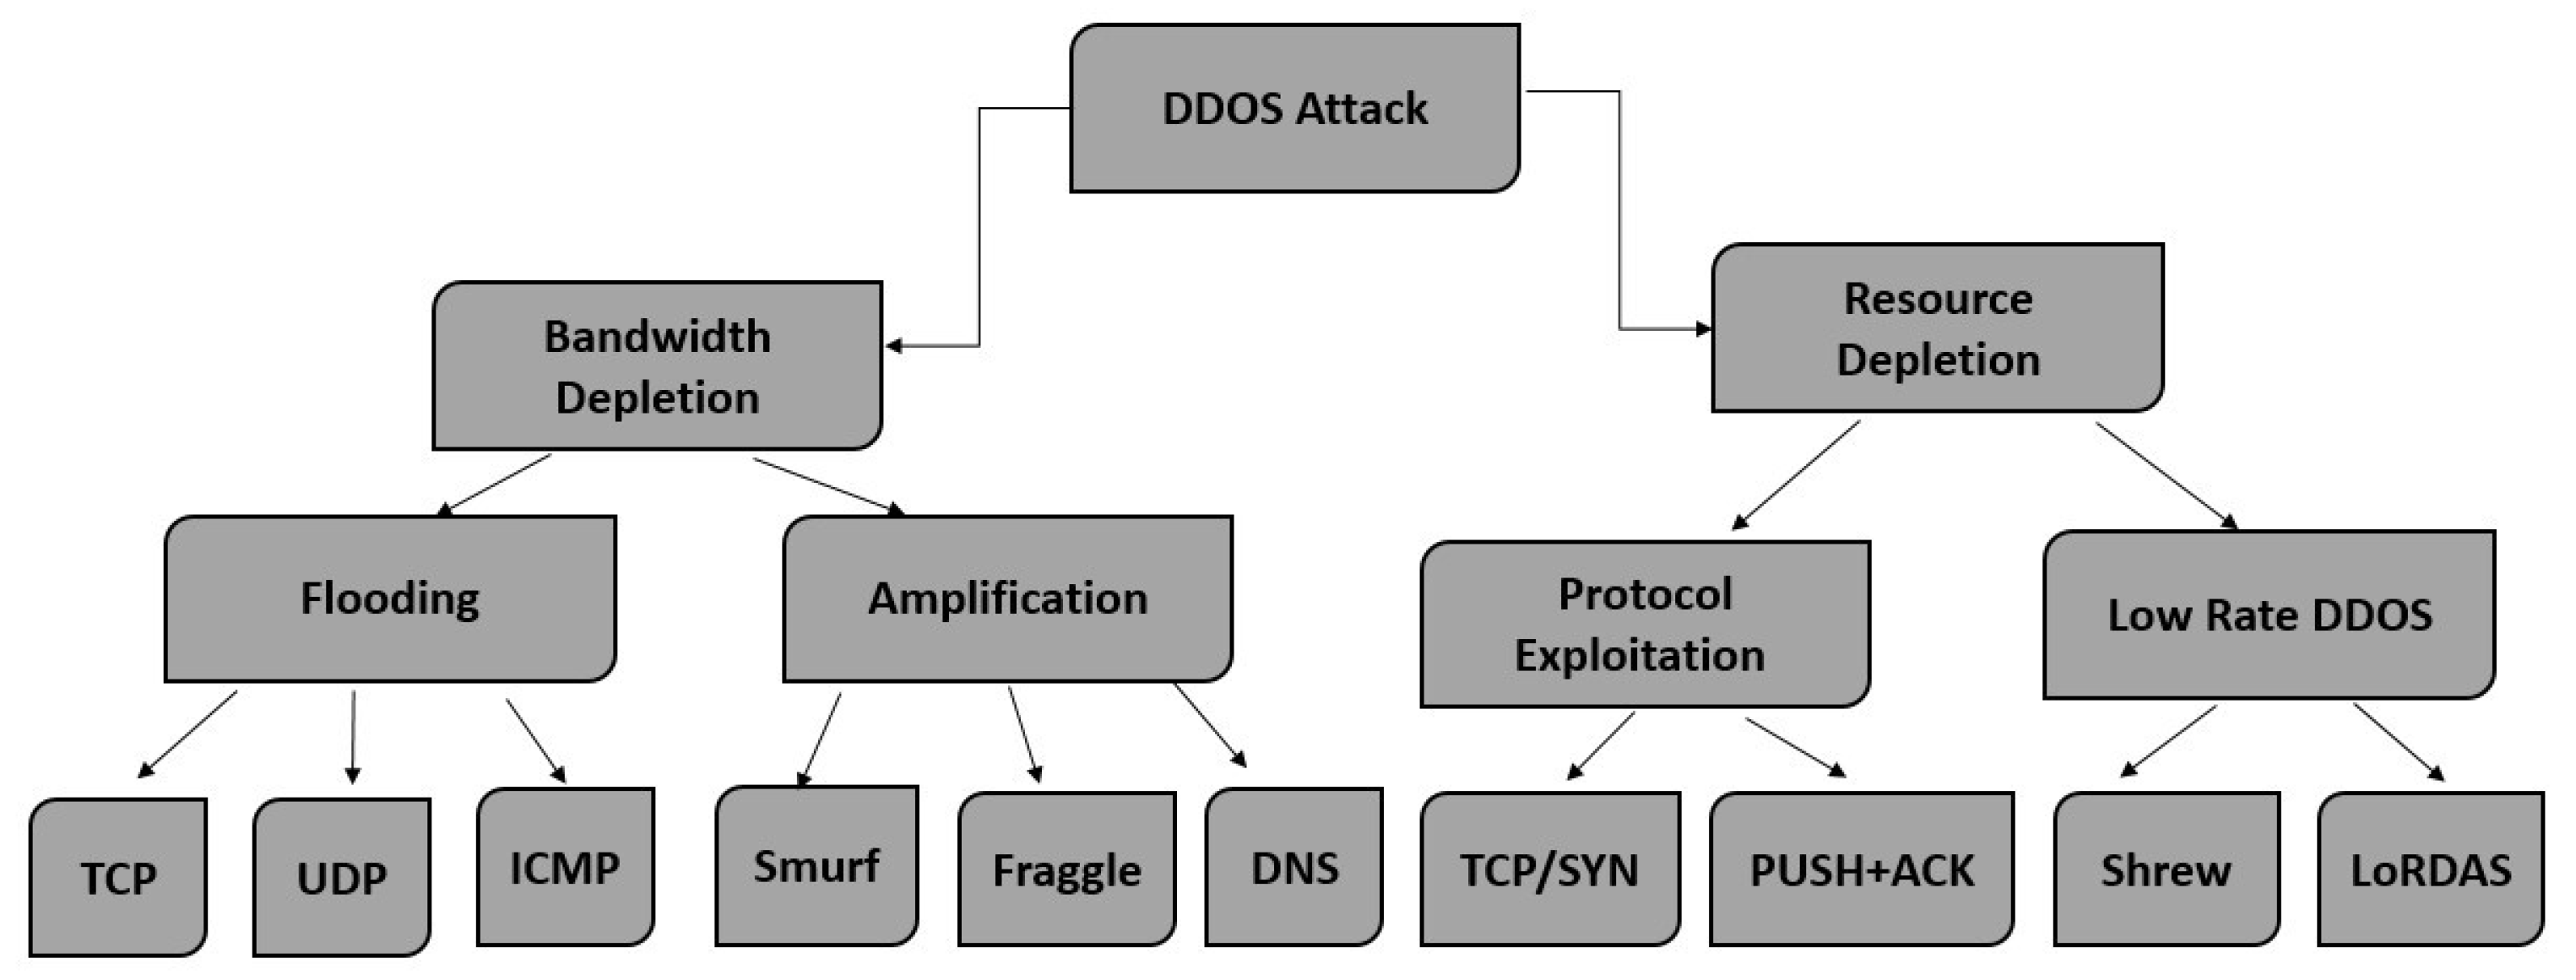 How to Prevent Port Scan Attacks? - GeeksforGeeks